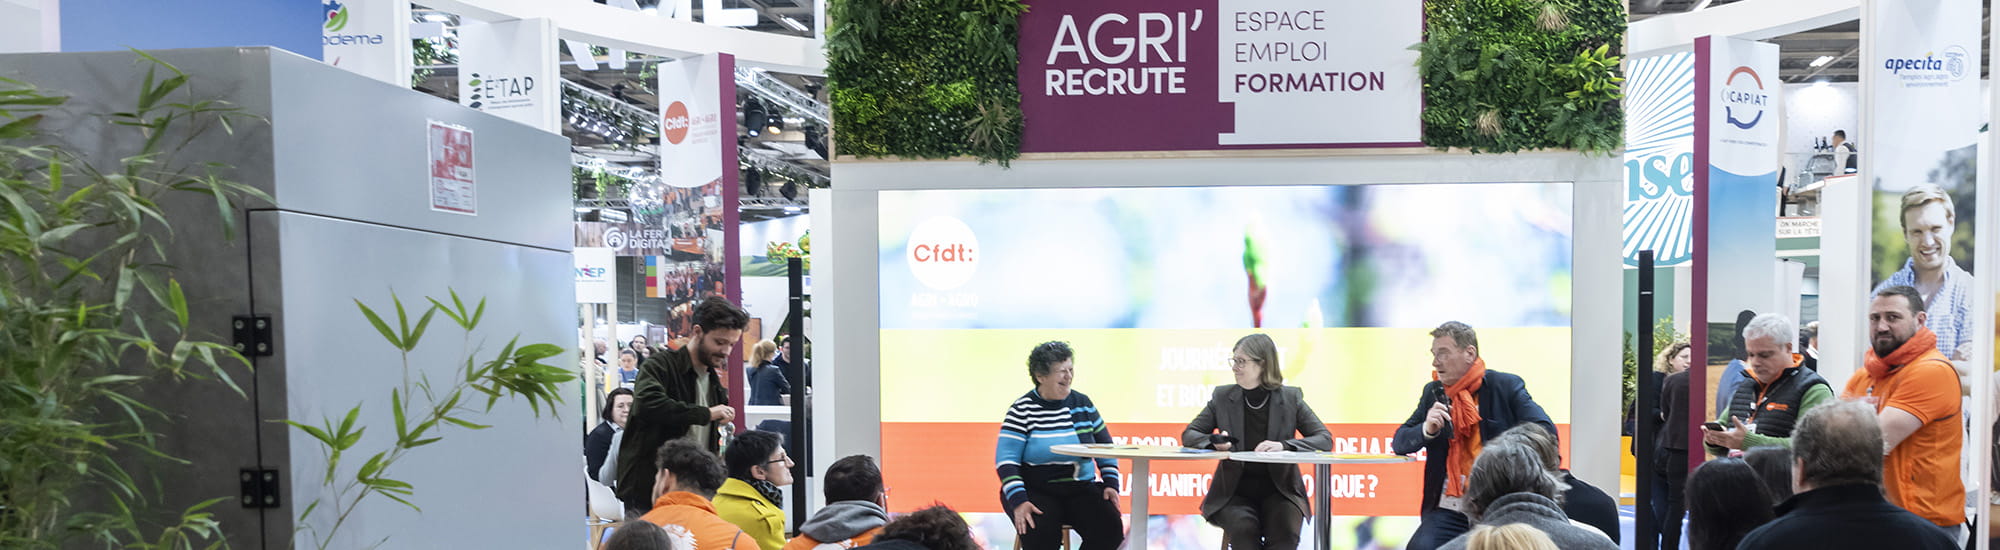 Conference in the Agri'Recrute pavilion